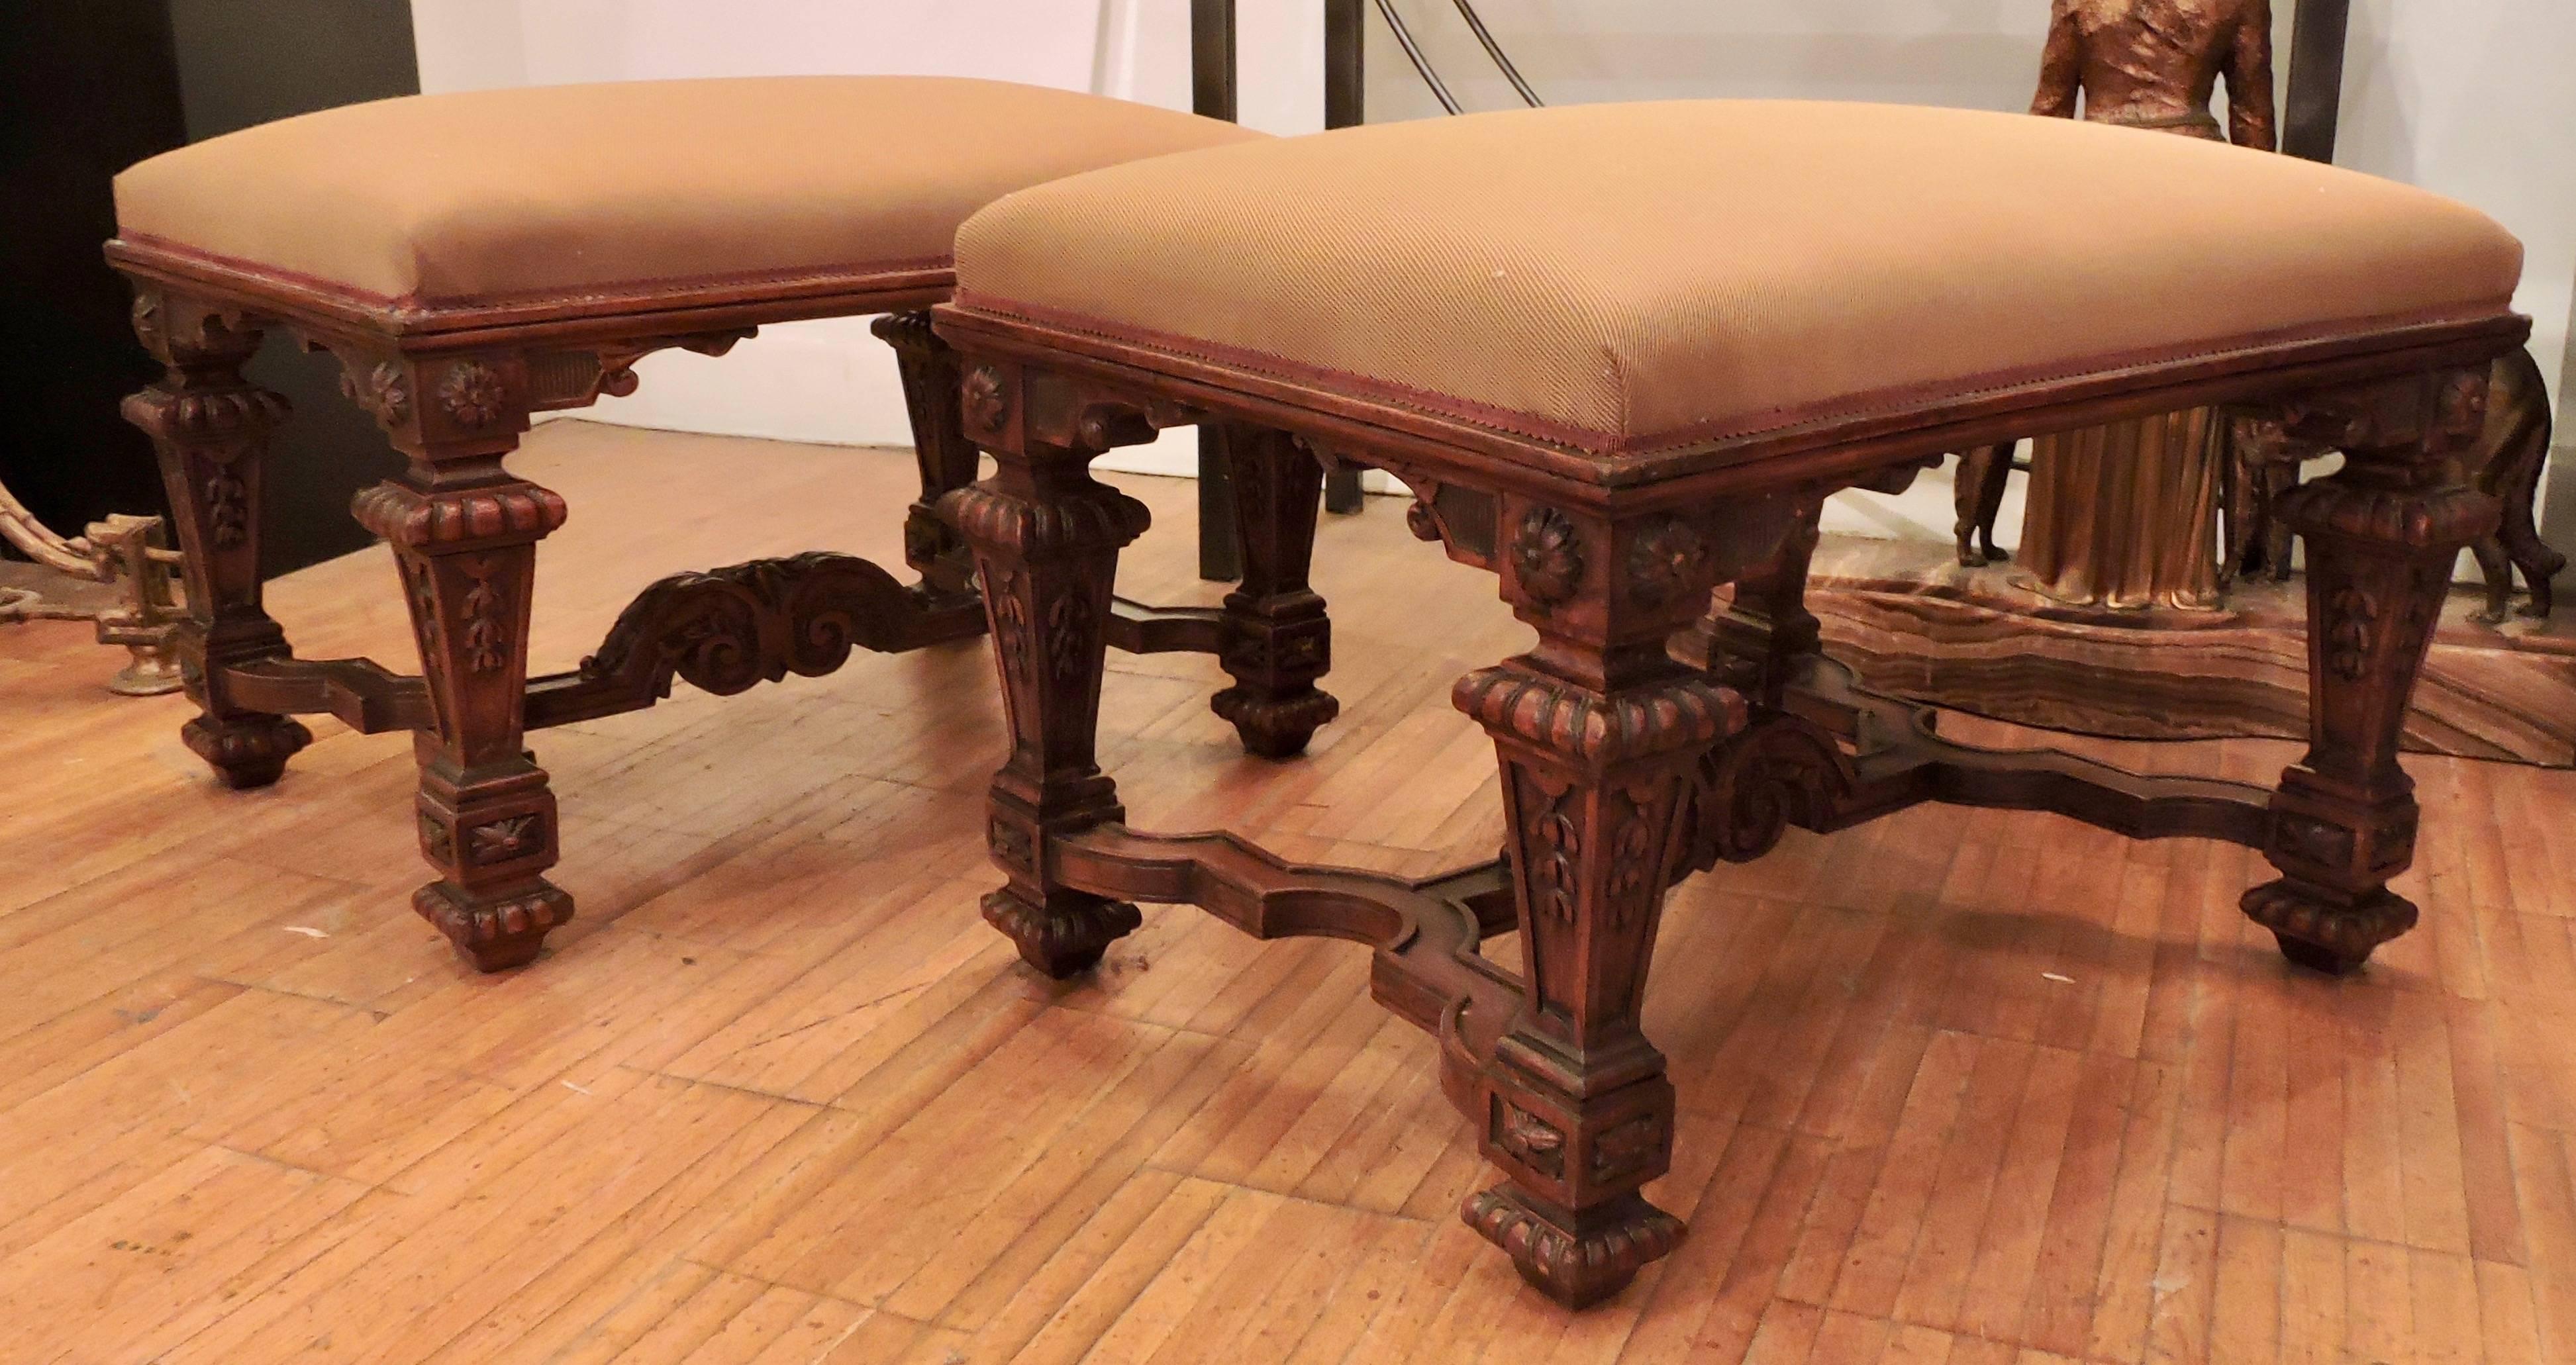 Pair of 19th century Louis XIV style rectangular stools
Four feet in sheaths carved with flowers and gadroons.